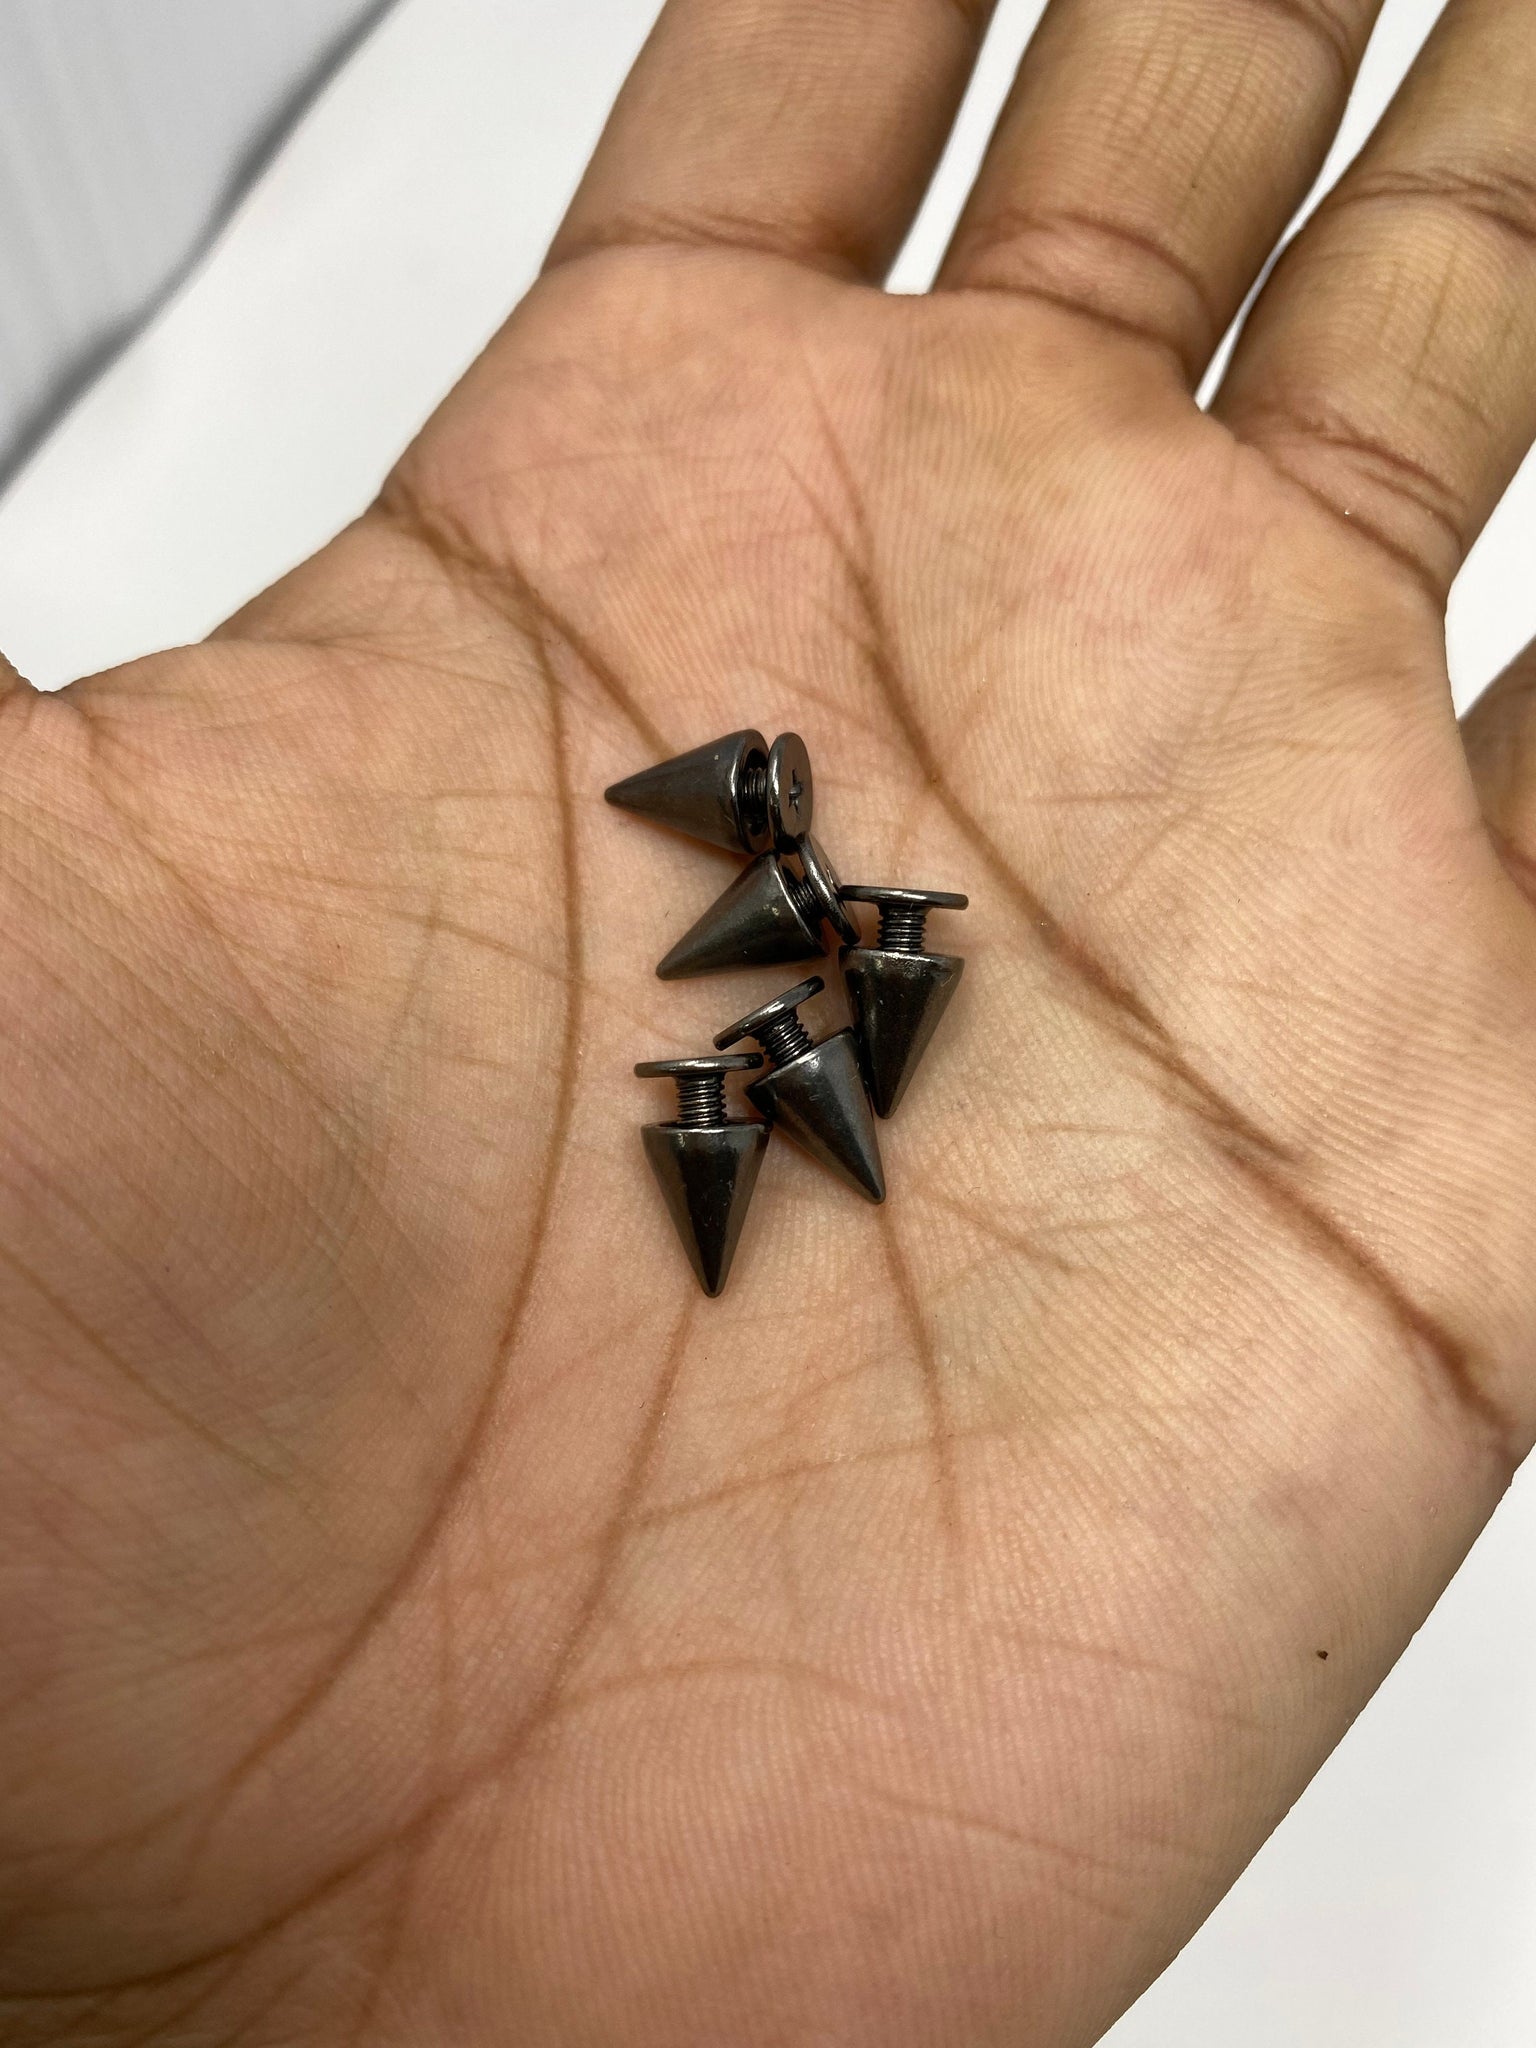 NEW, "Screw on Spikes", 10mm 3/8" Black Spiked Studs, Cone Spikes Screw-back Studs for Clothing, Leather, Spikes with Screws, 100 PCS